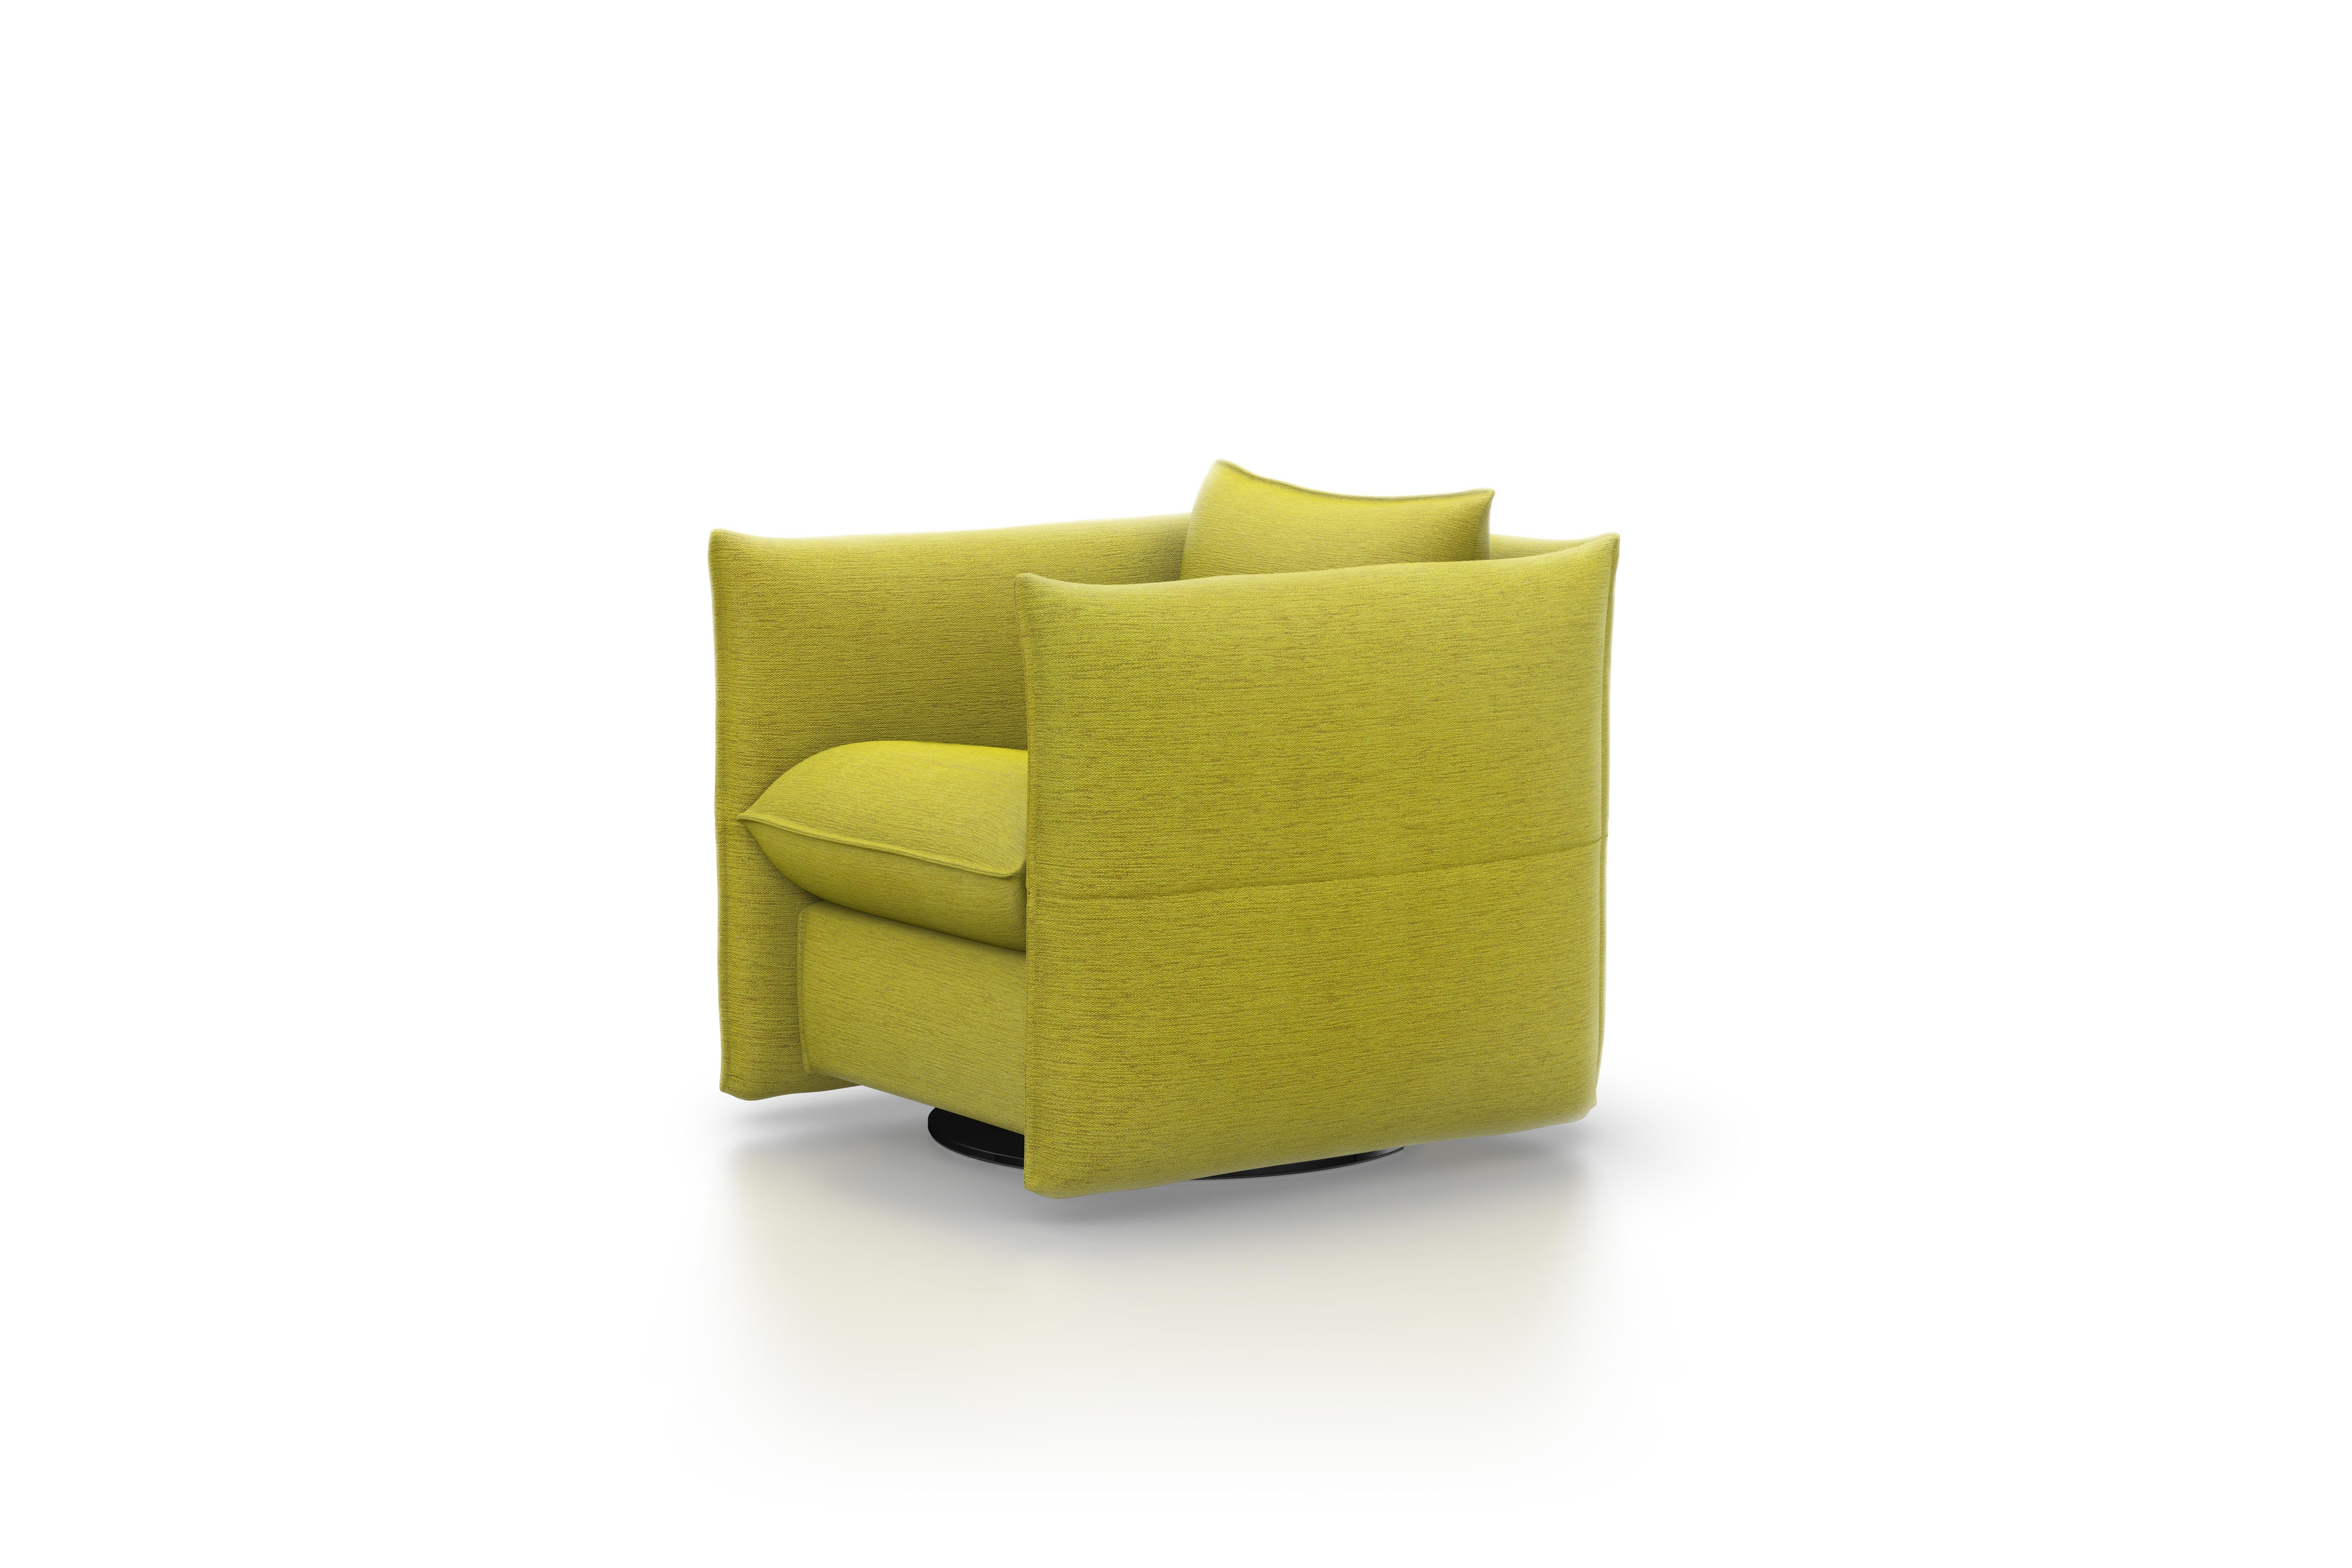 The Mariposa club armchair is suitable for smaller urban living spaces and for lounge and hospitality settings. The slim line body of both the sofa and armchairs offers maximum seating comfort, while the compact dimensions take up limited space.